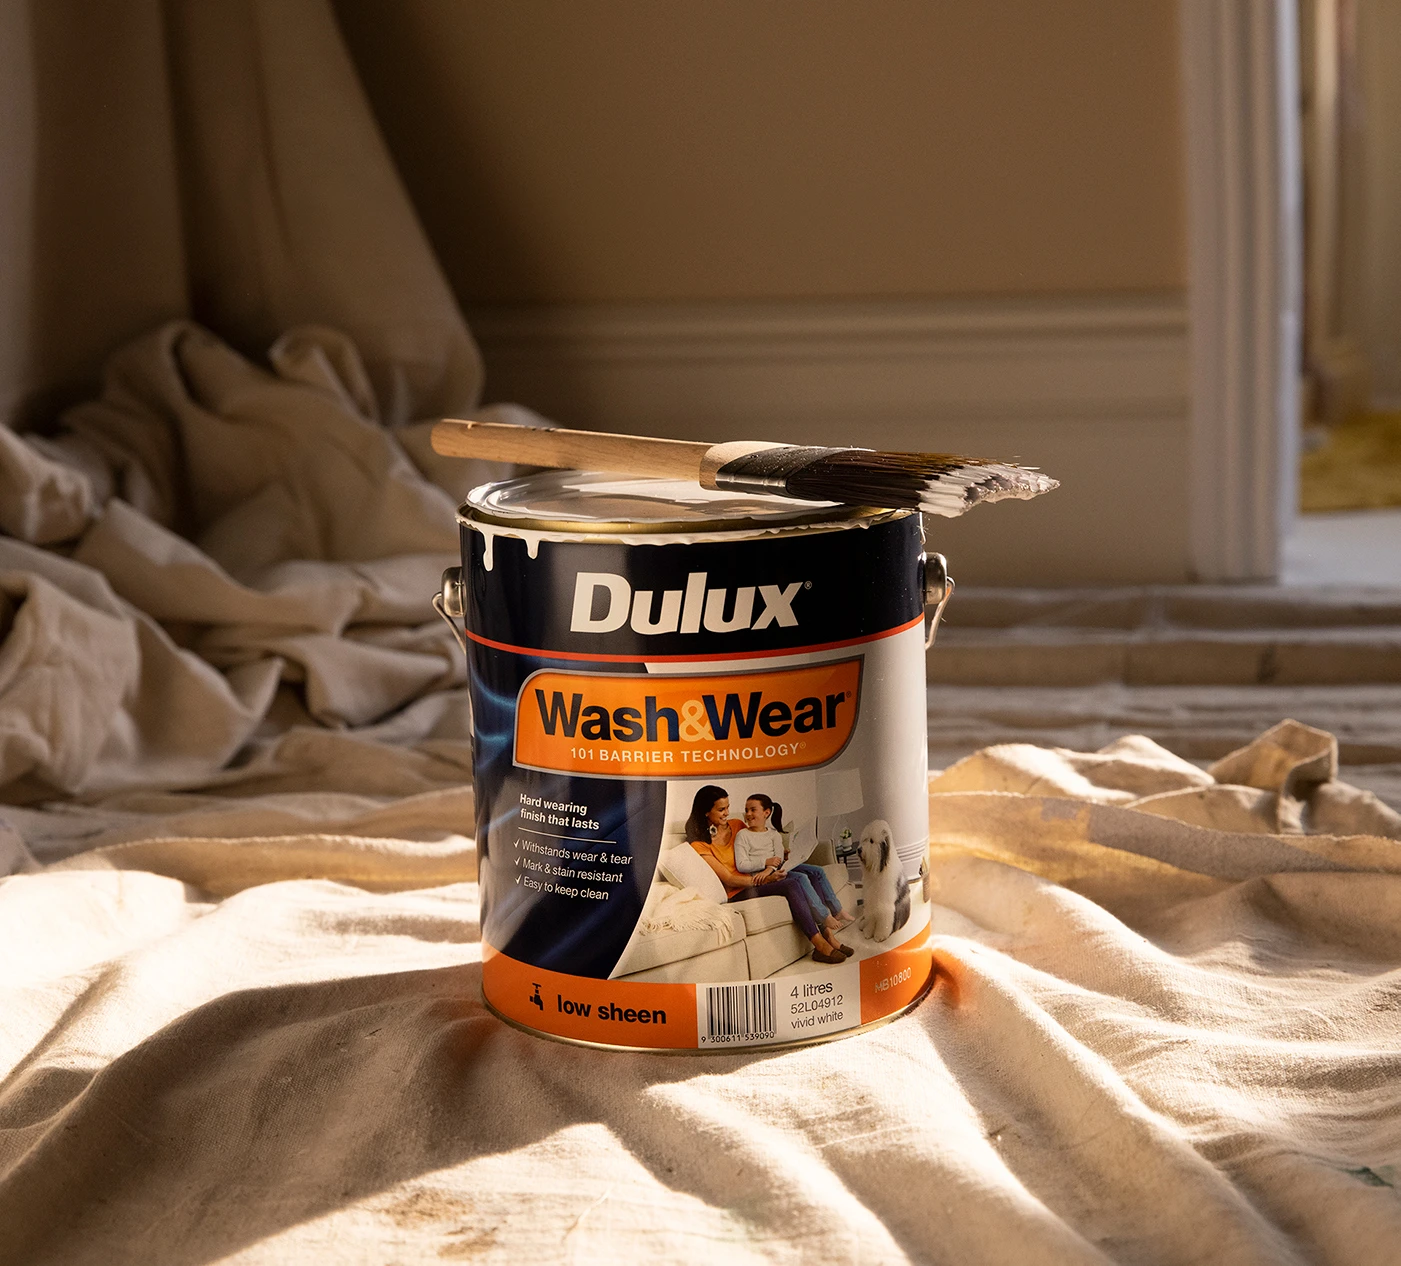 A Dulux Wash&Wear tin with brush on top